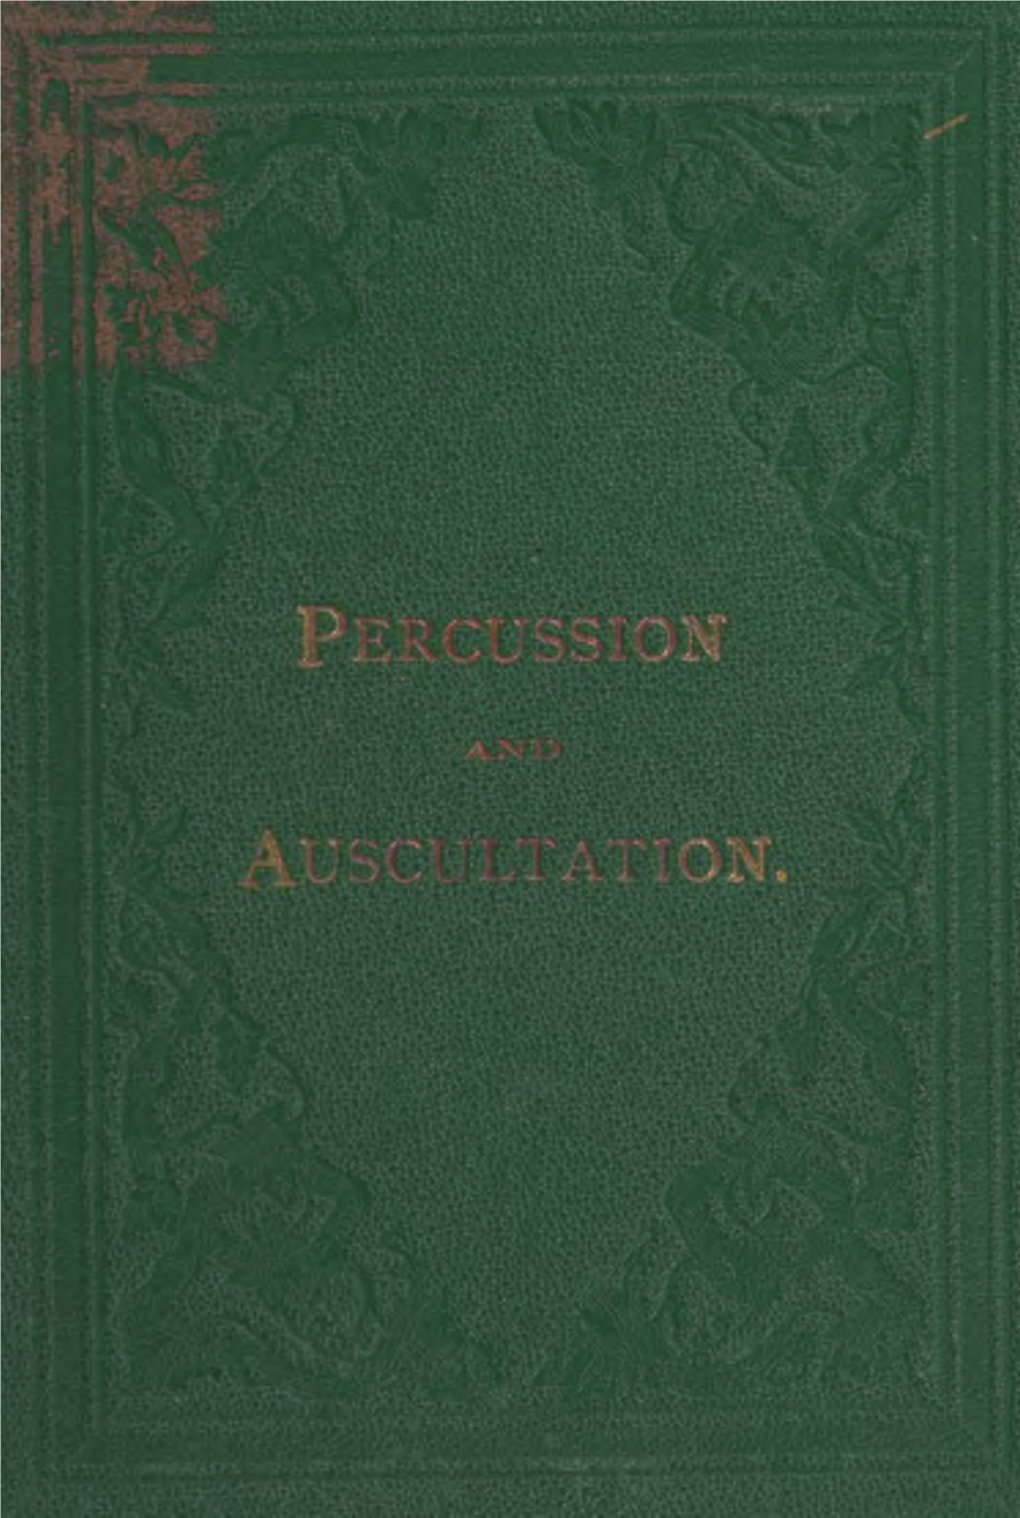 A Pocket Manual of Percussion And